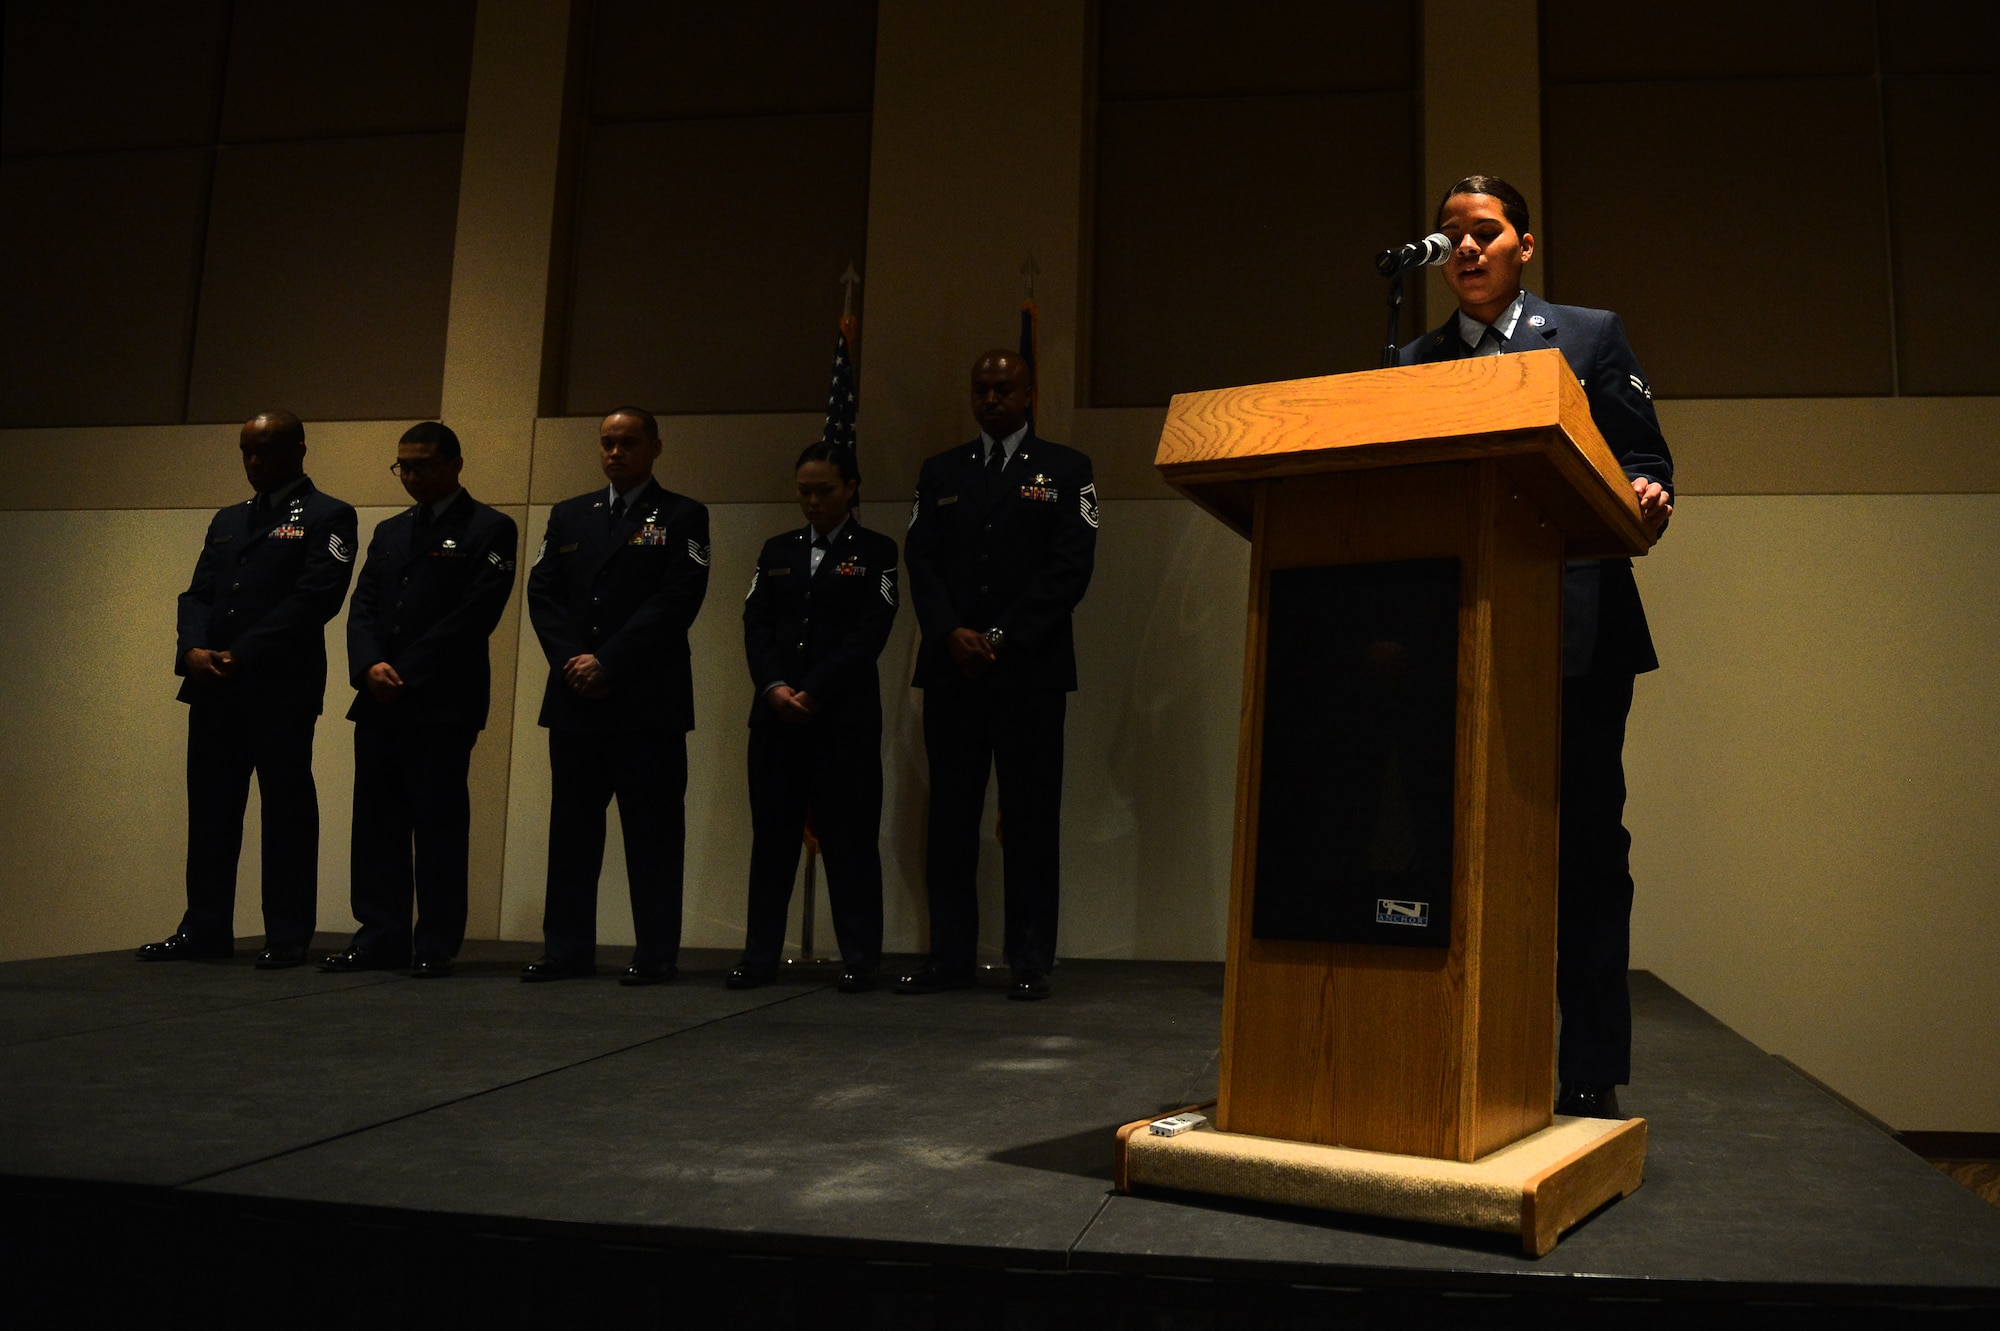 Airman 1st Class Alyssa Duprey, 460th Space Wing Public Affairs broadcast journalist, reads part of a speech by Dr. Martin Luther King, Jr. as part of the Leadership Development Center Jan. 11, 2016, on Buckley Air Force Base, Colo. The ceremony featured readings of Dr. King’s speeches, videos, and southern style food. (U.S. Air Force photo by Staff Sgt. Darren Scott/Released)